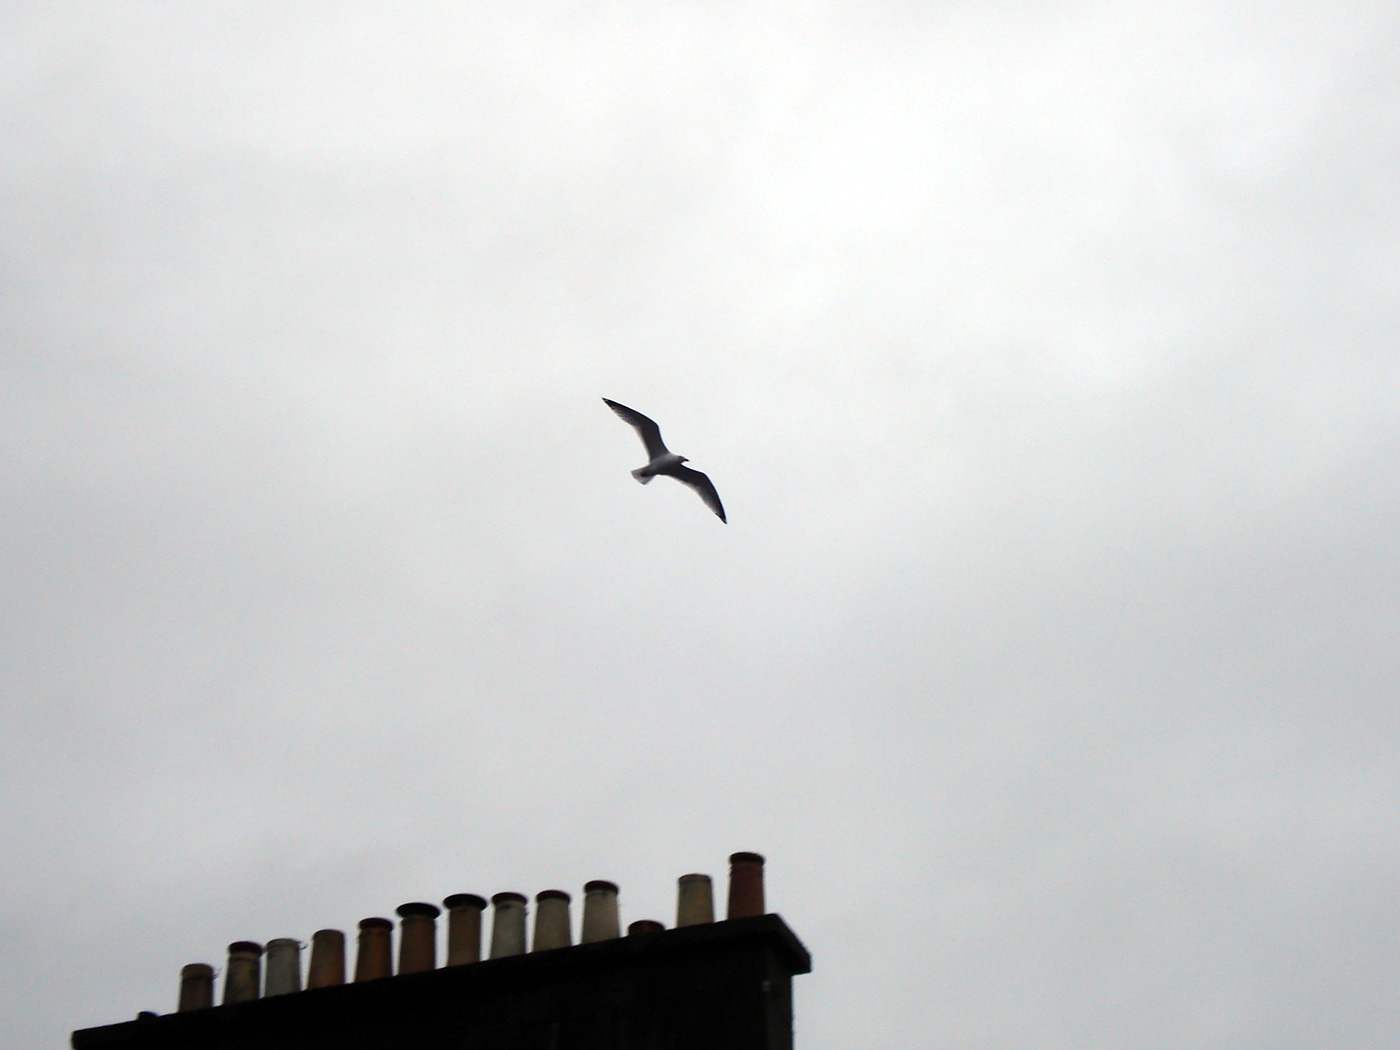 A seagull gliding above a row of chimneys against a grey sky